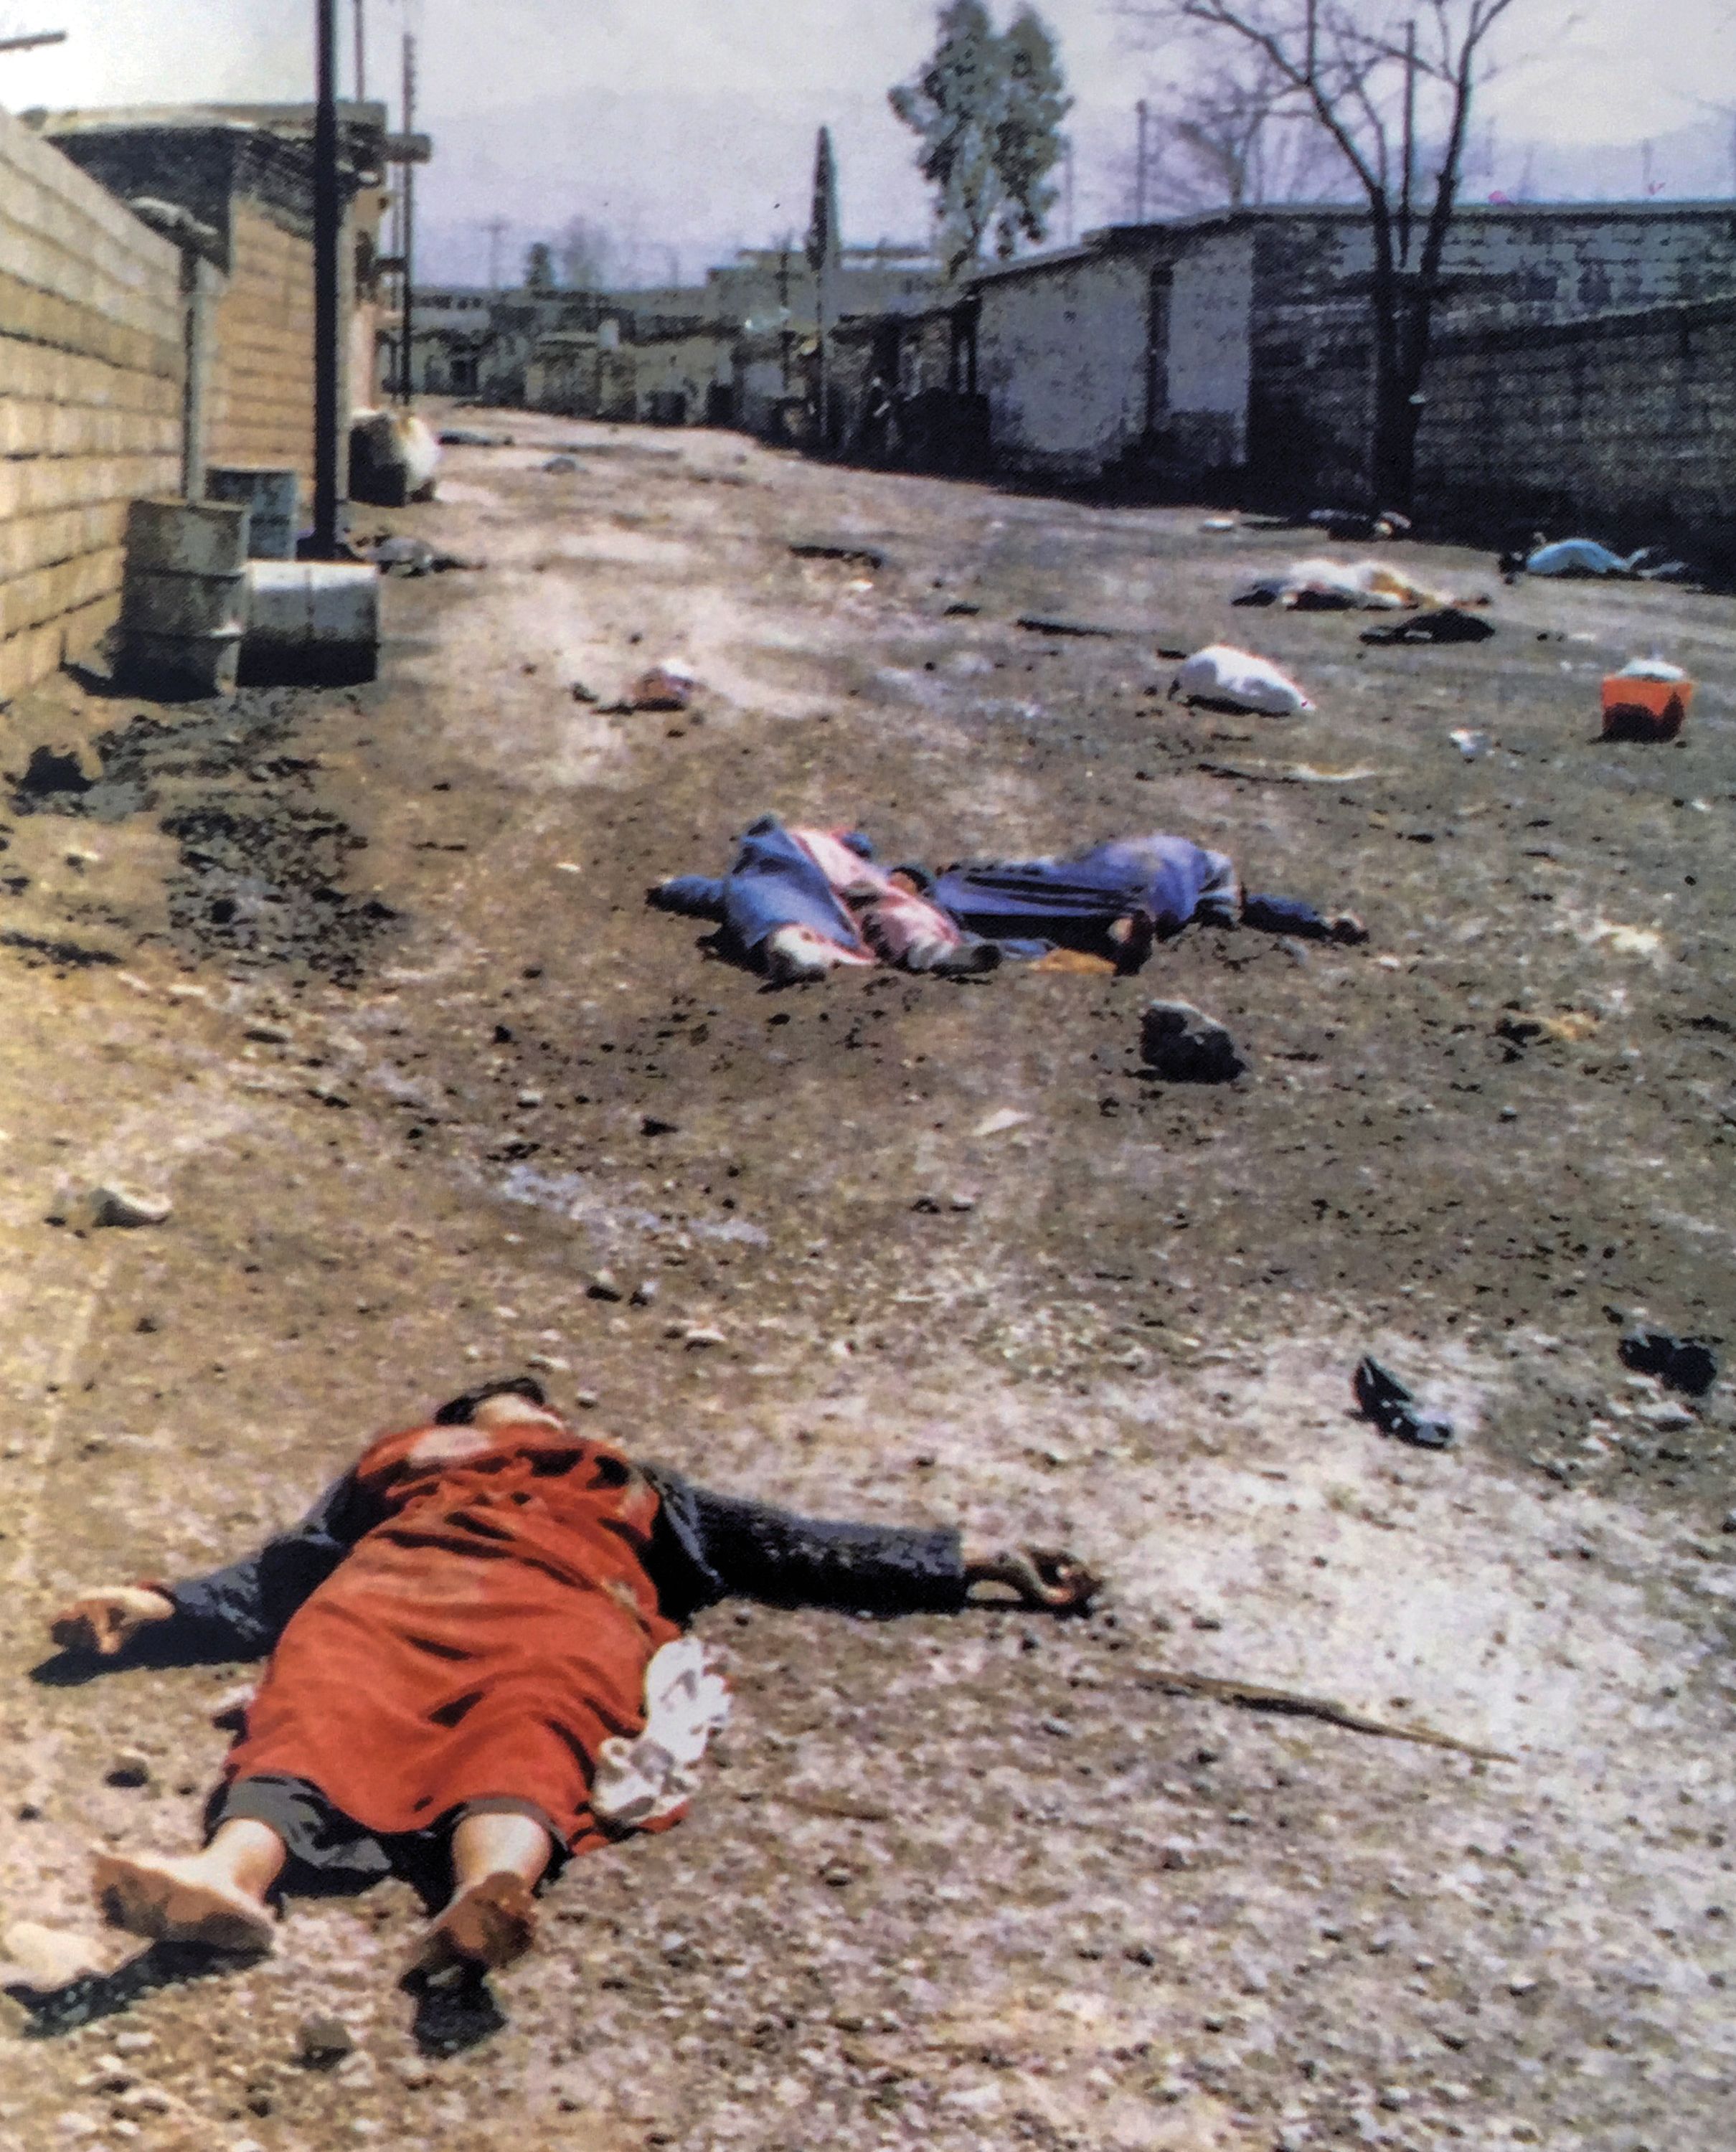 Halabja, 17 March 1988: Iraq attacked its own citizens with nerve agents. During its war with Iran, enemy soldiers and civilians were frequent targets. Image by Saeed Sadeghi/Courtesy Abbas Foroutan.